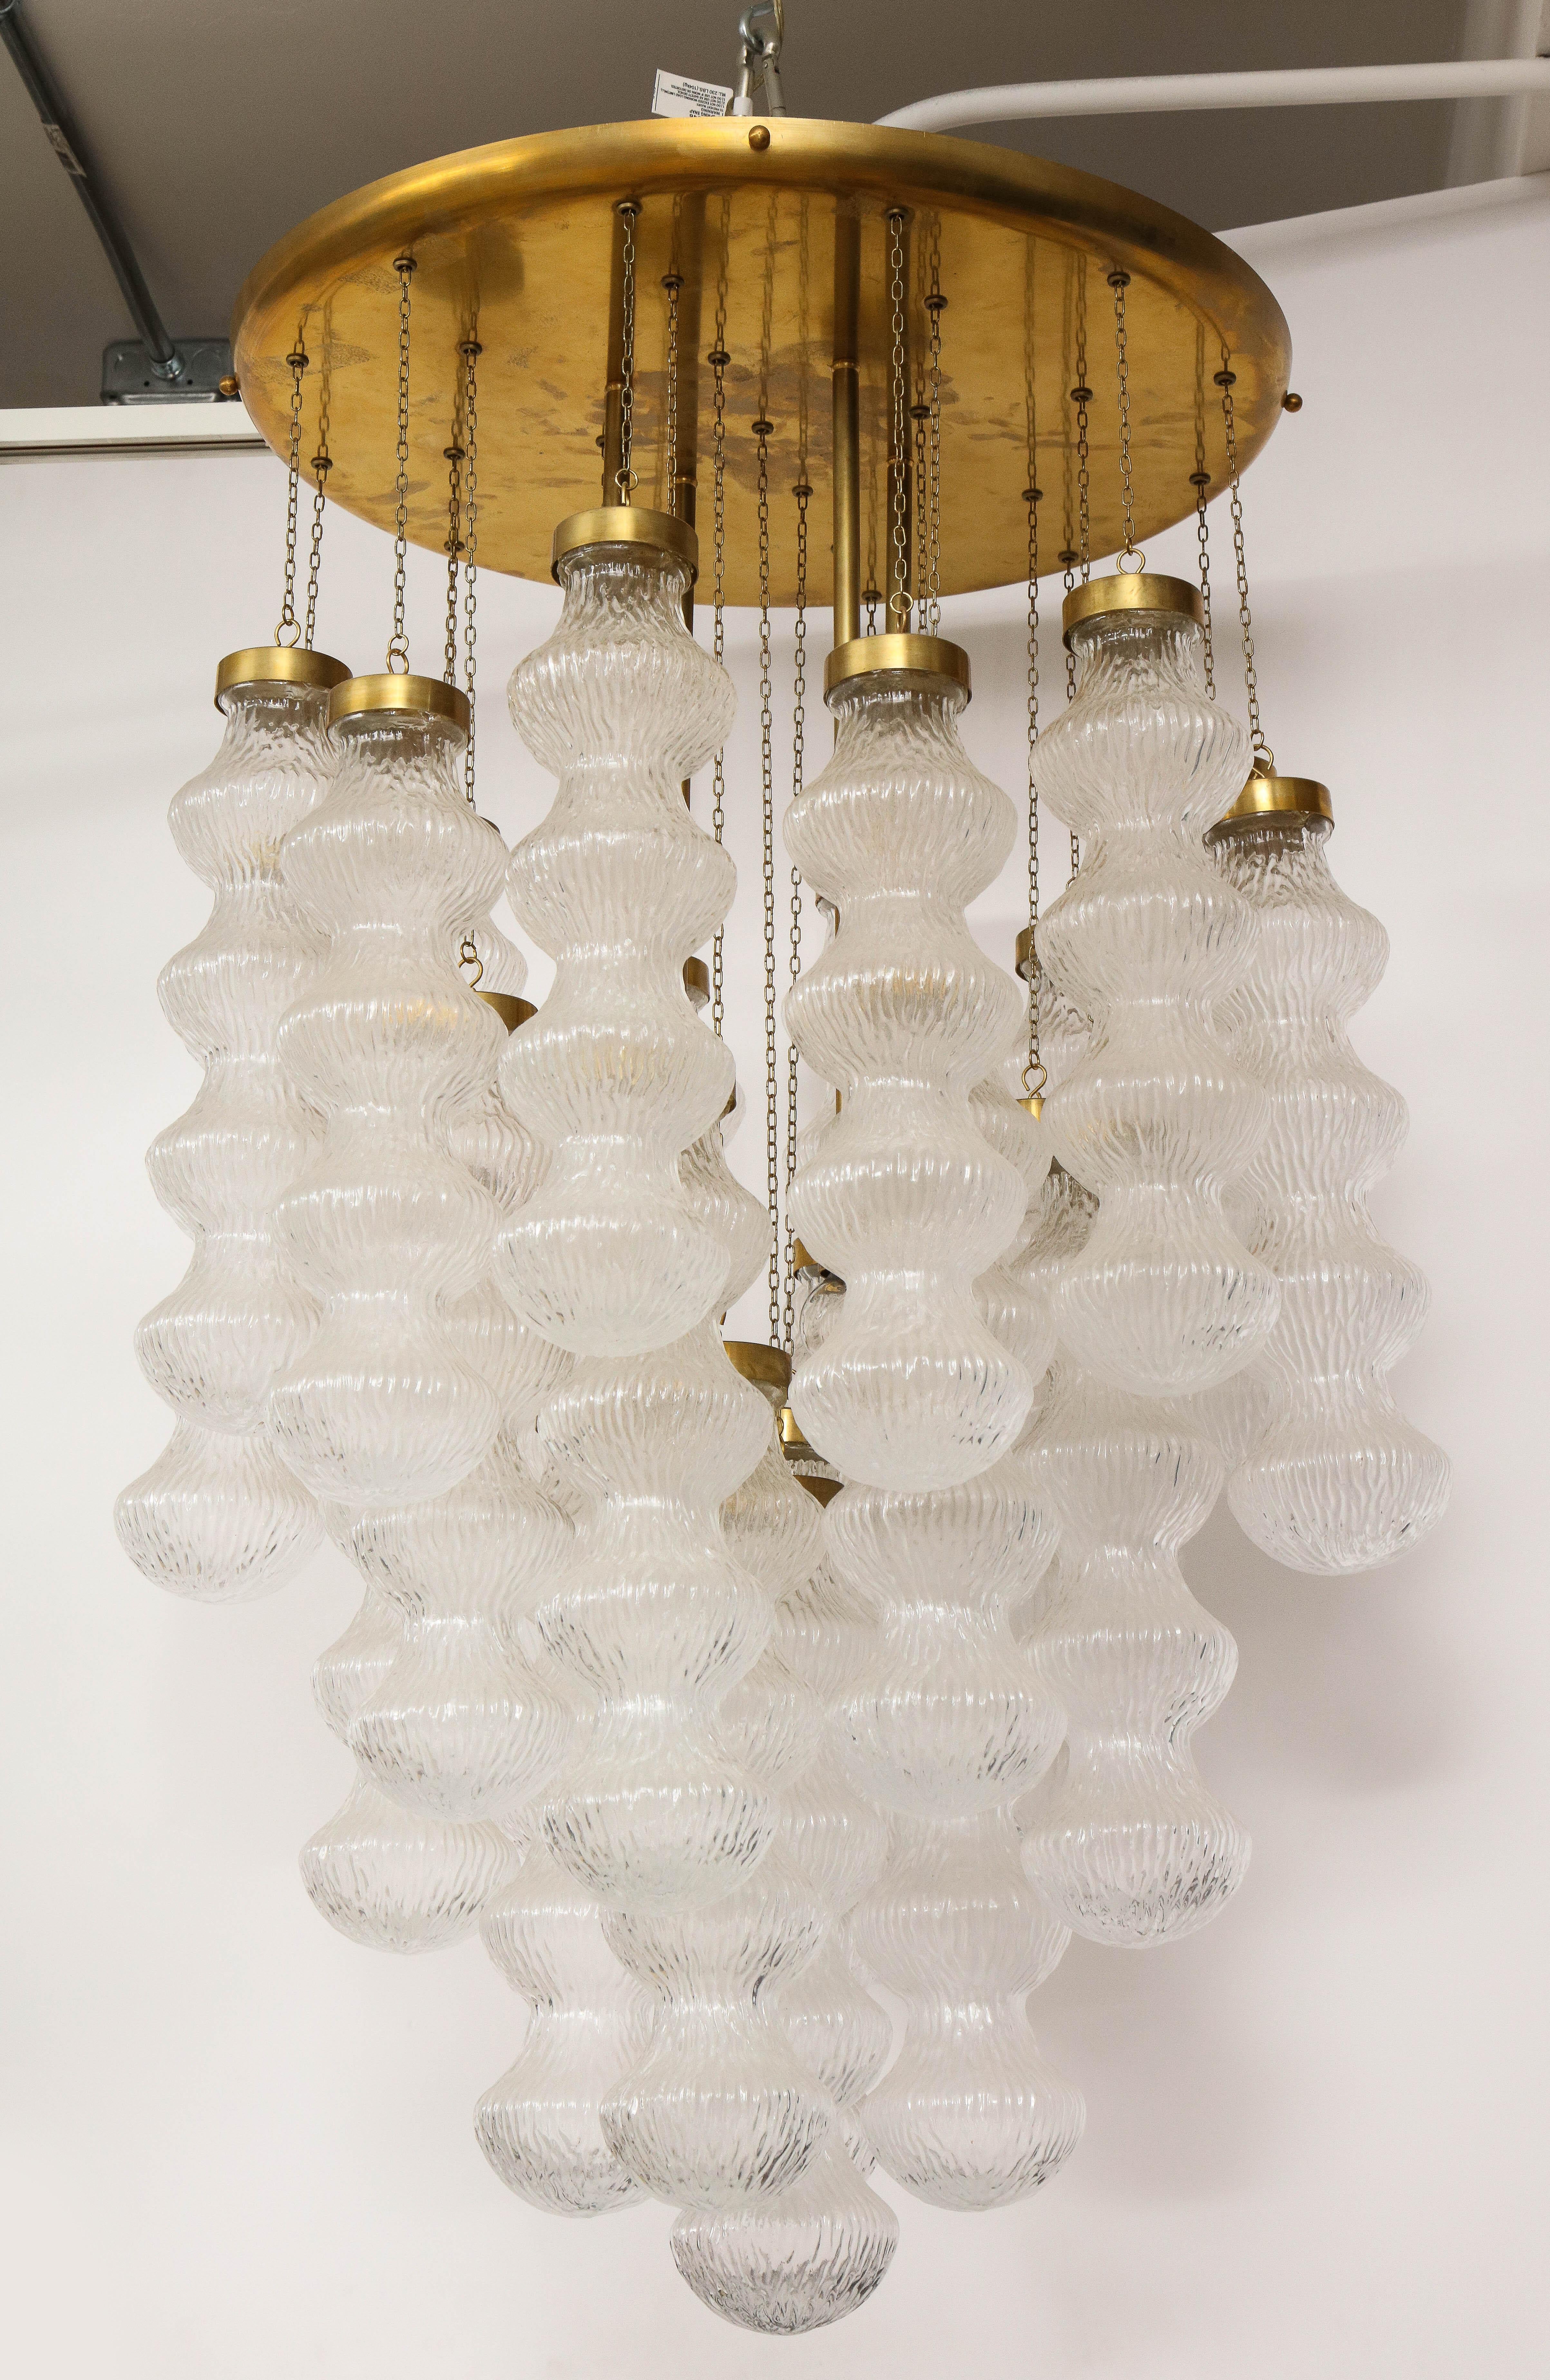 A mid-century Italian four light chandelier attributed to Cenedese comprised of hand blown Murano textured, undulating glass pendants suspended by fine chains of varying lengths from a brass 22.5